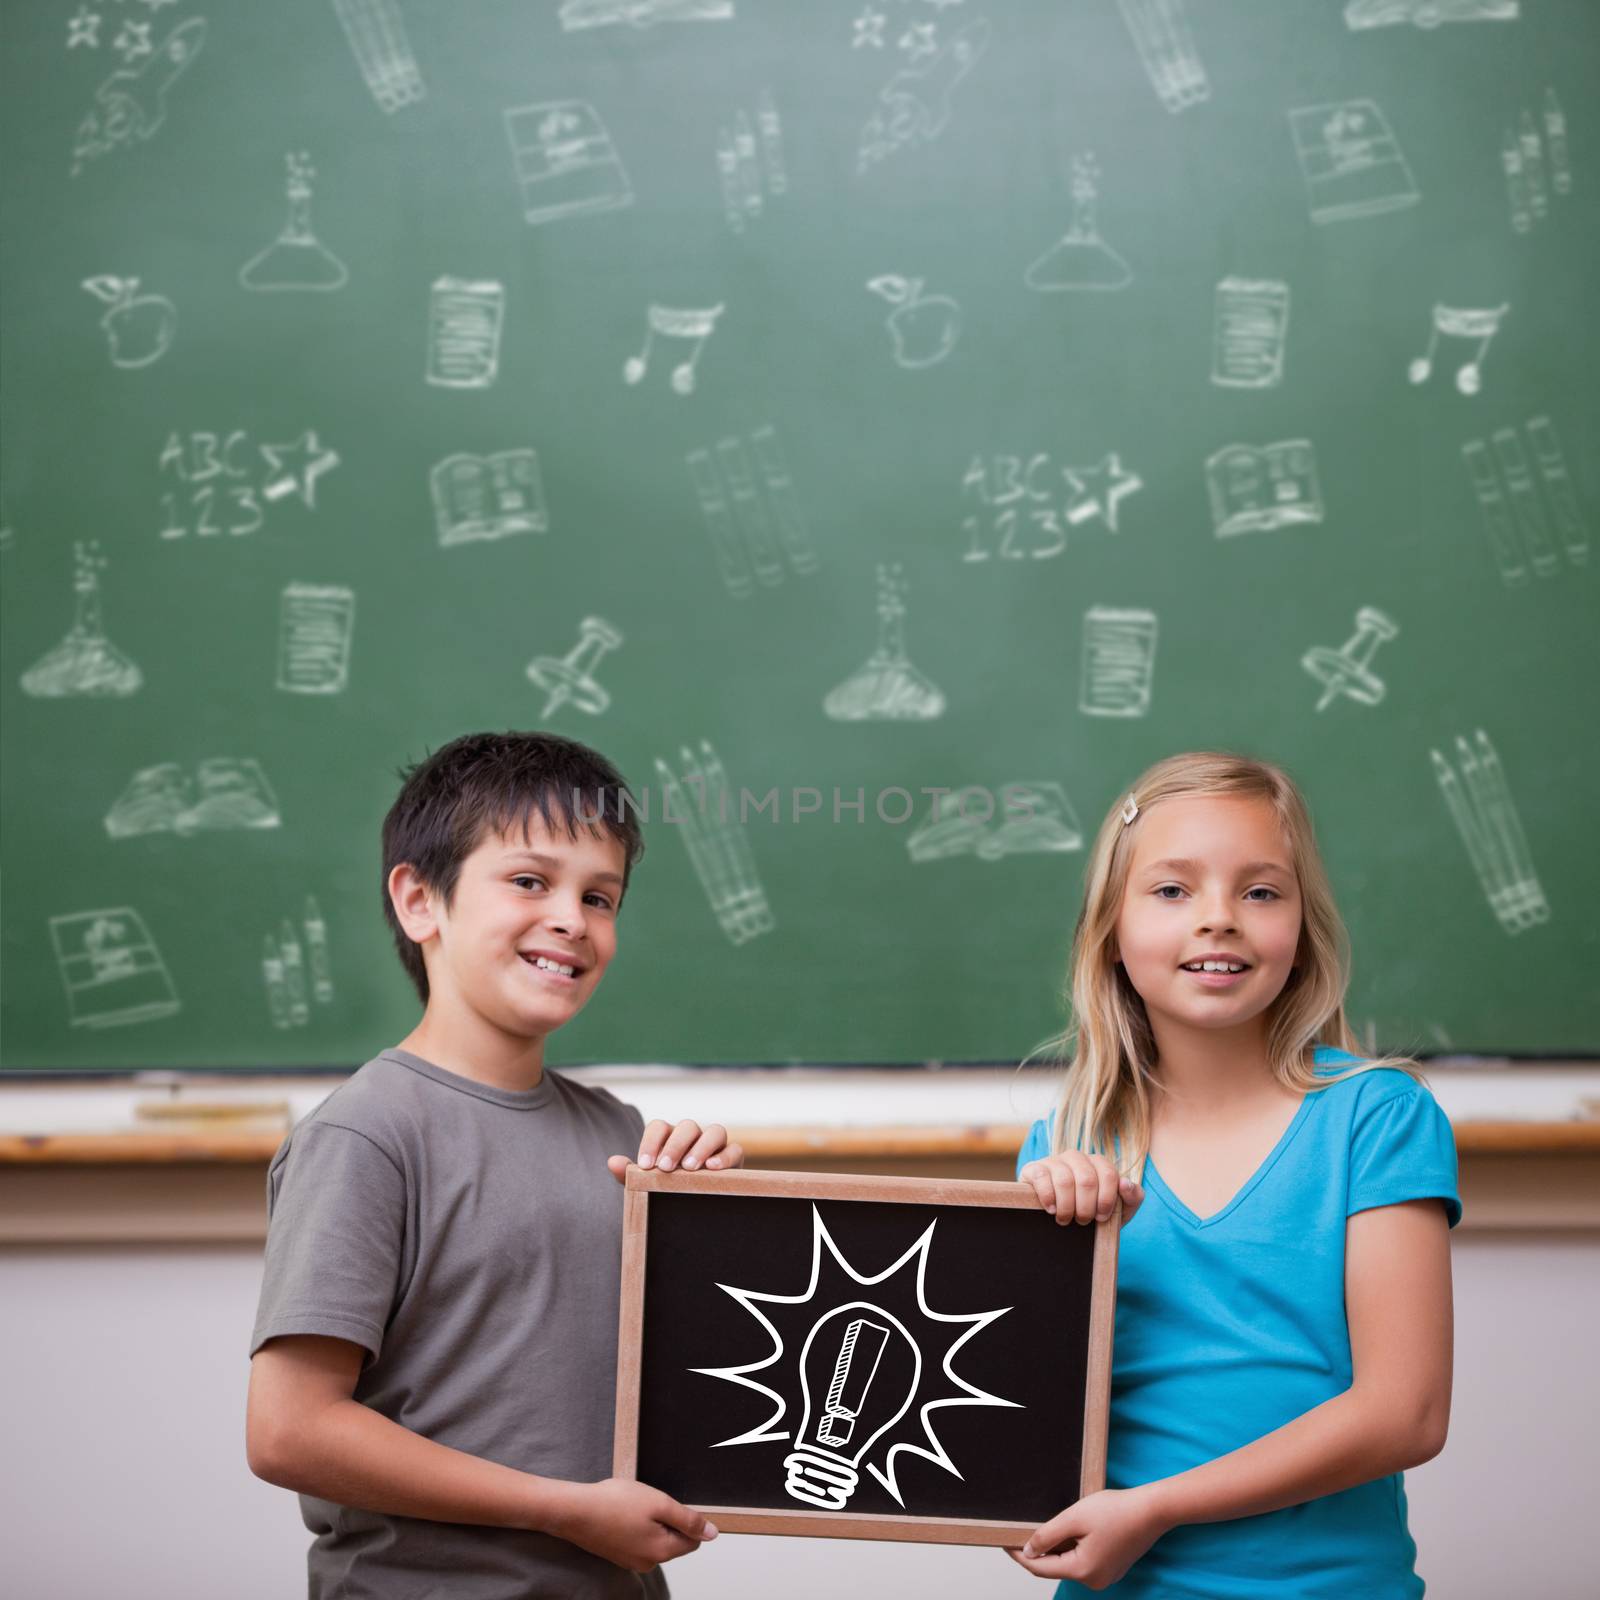 Idea and innovation graphic against cute pupils showing chalkboard